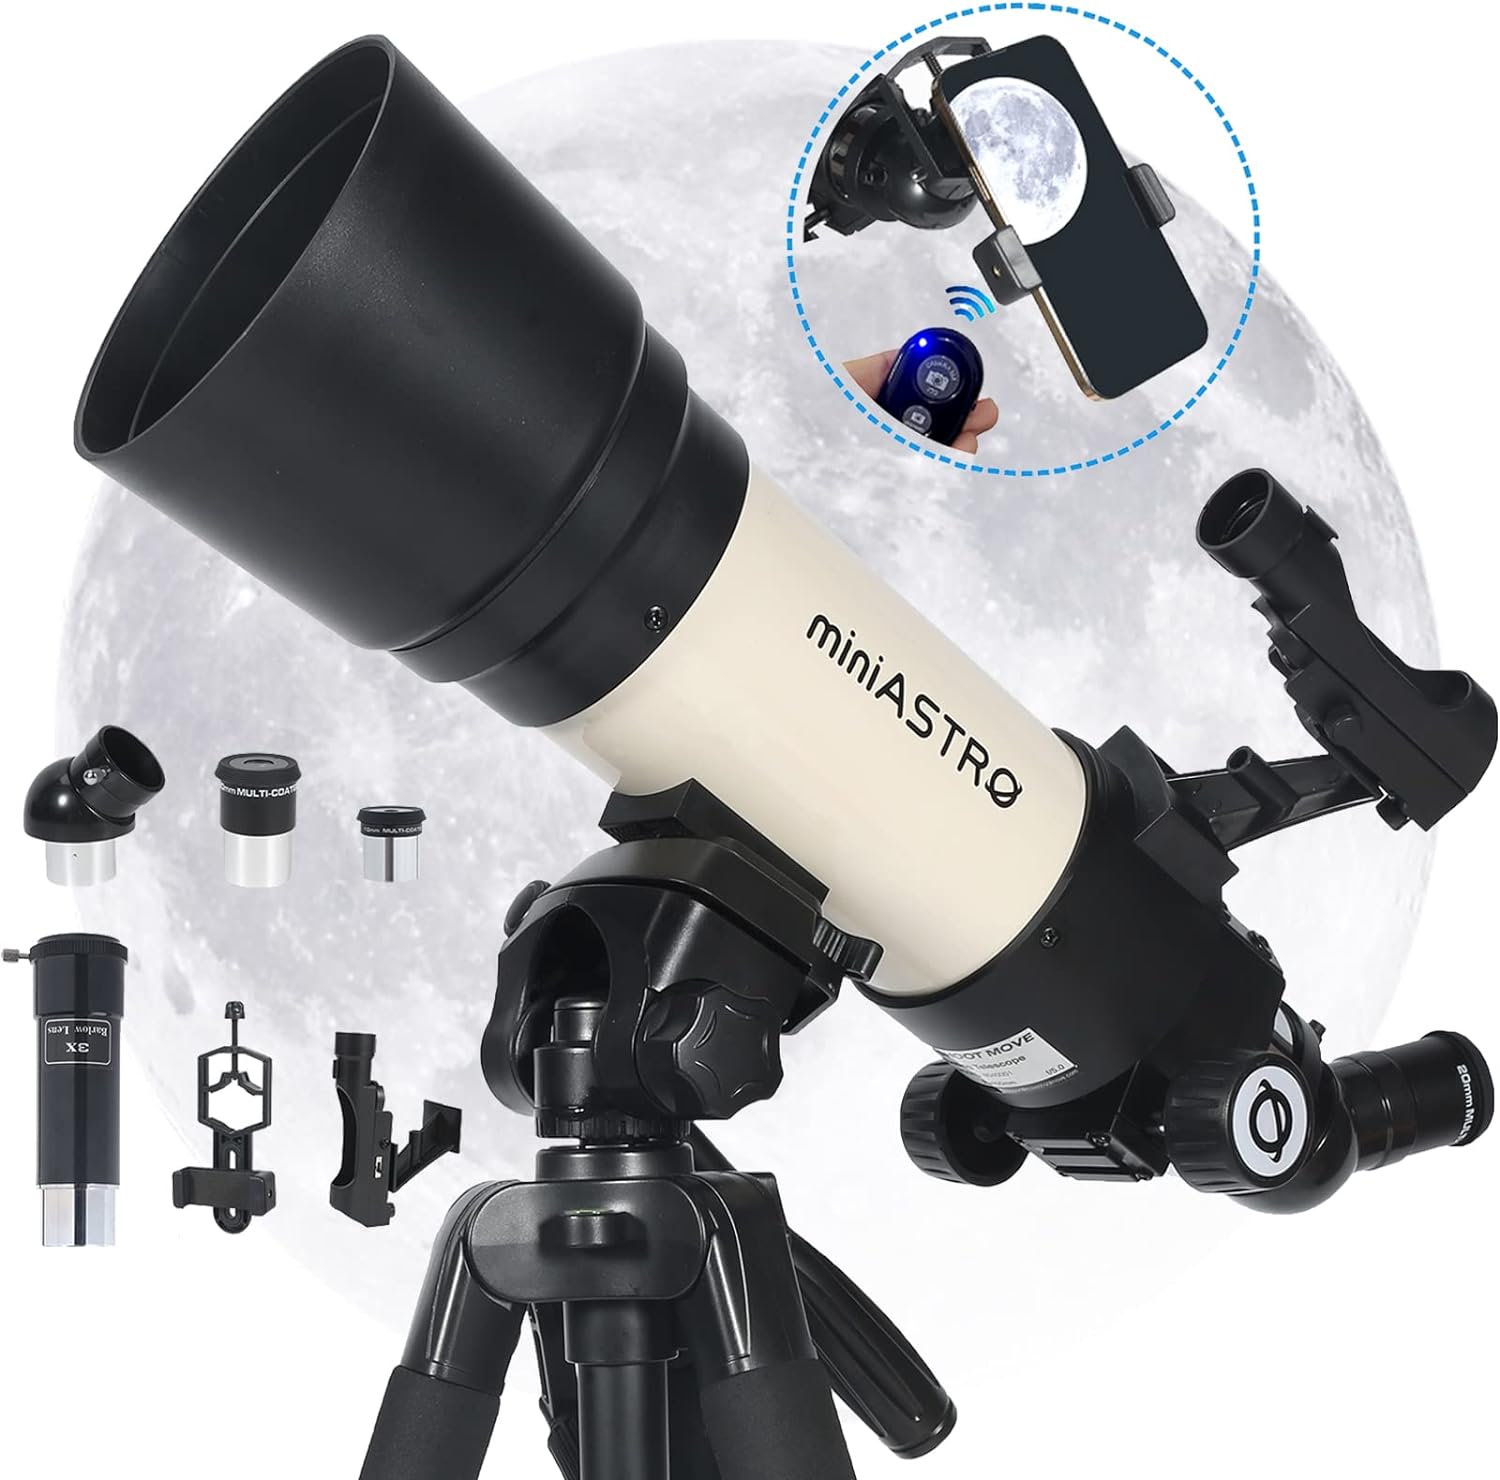 80mm Refractor Telescope for Adults Astronomy - Professional Astronomical Telescope for Beginners Viewing Planets- Portable and Powerful Telescopes with Adjustable Tripod, Phone Adapter, Easy to Use